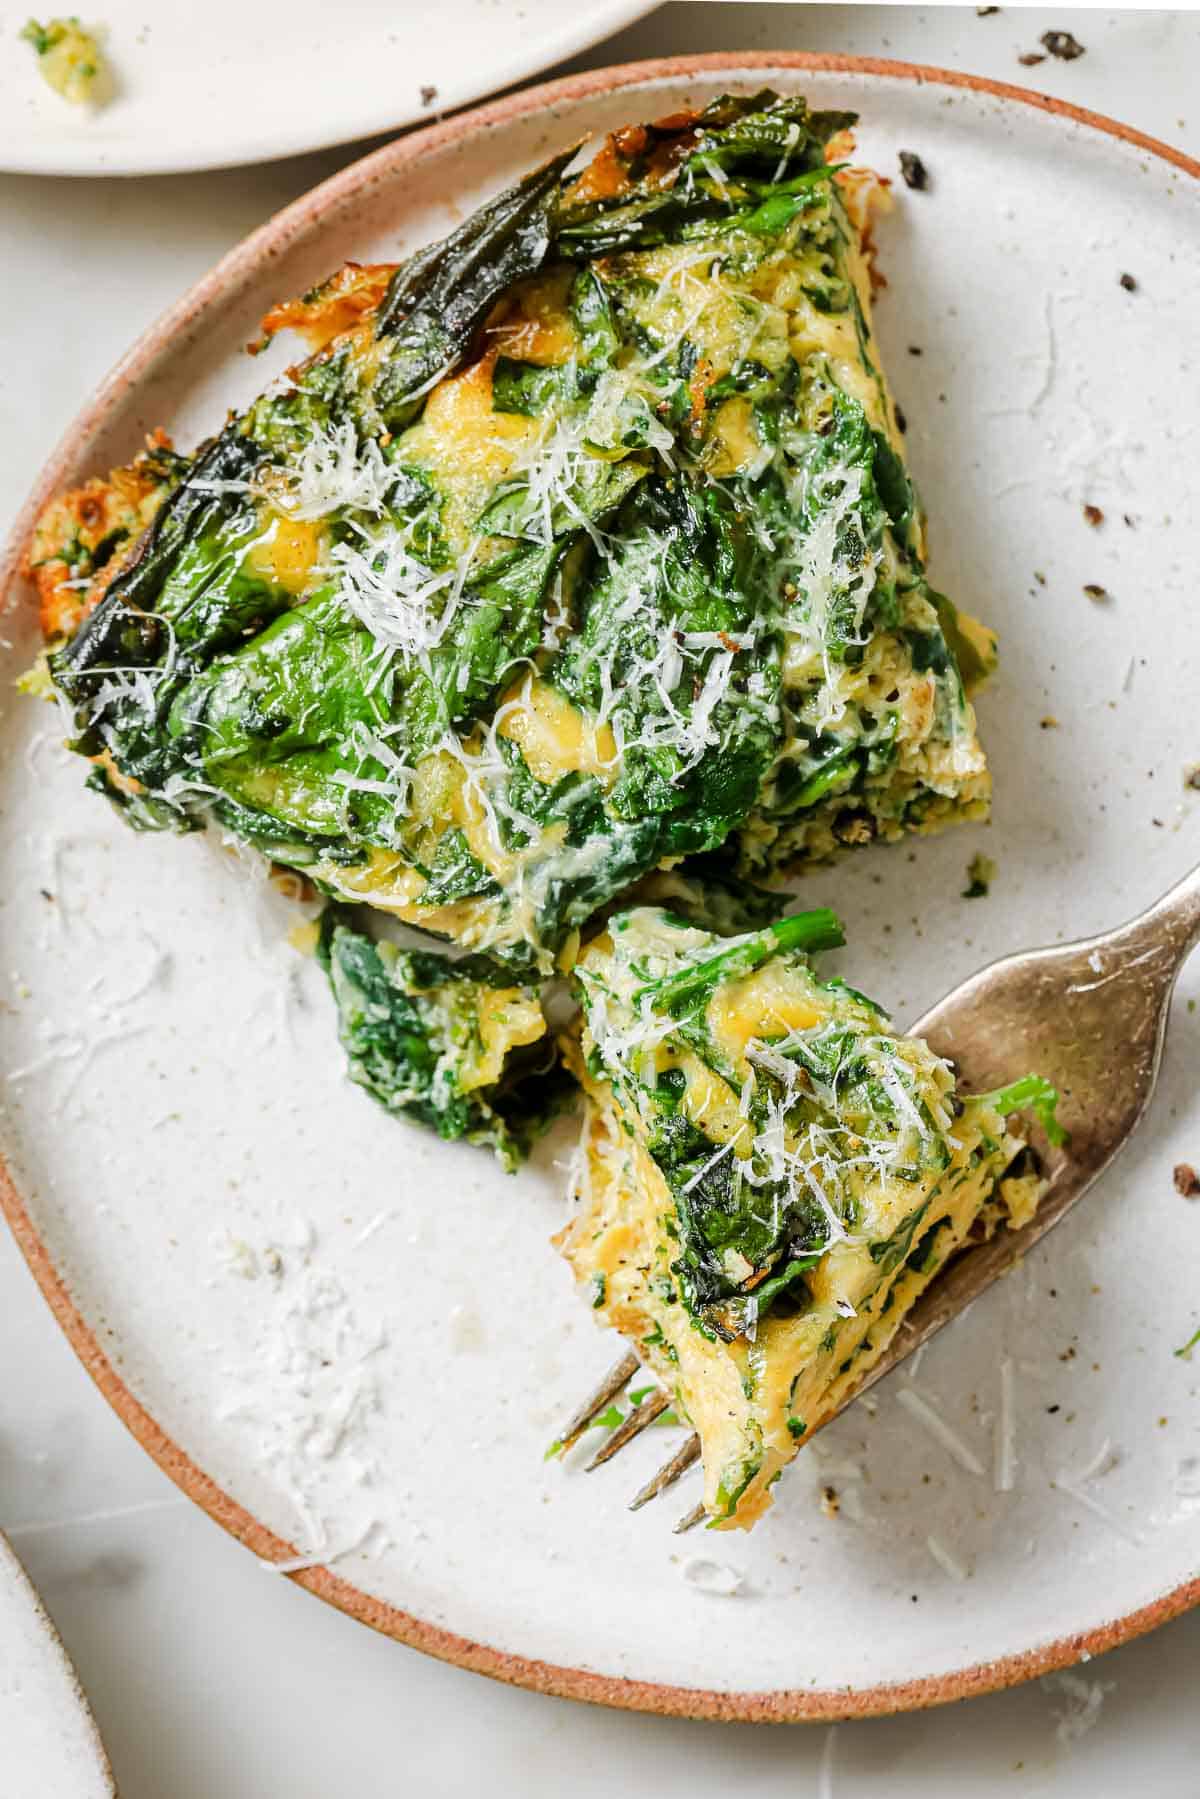 A slice of spinach parmesan frittata on a white plate with a fork.